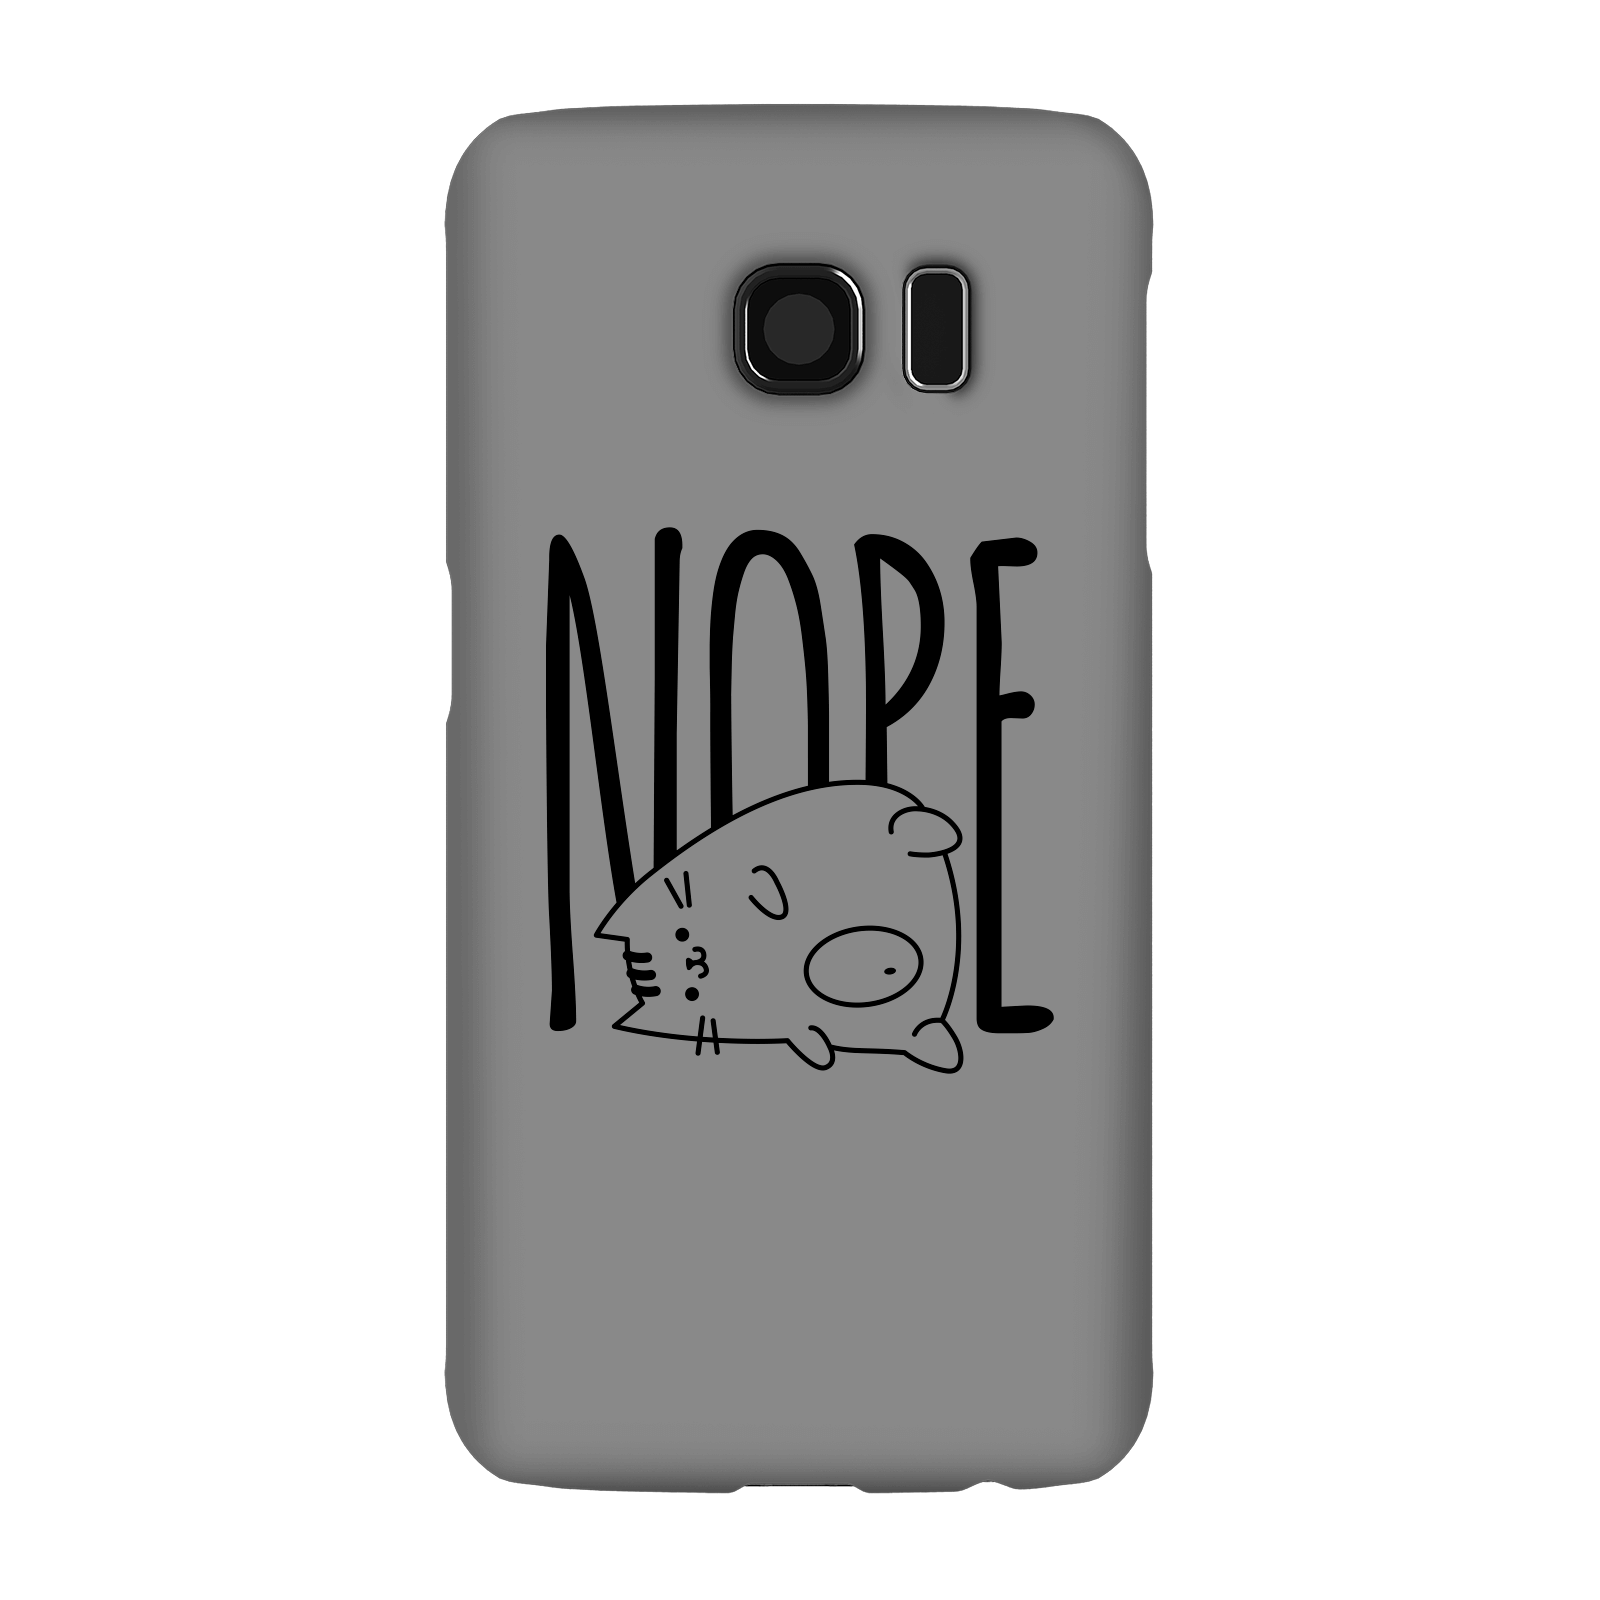 Nope Phone Case for iPhone and Android - Samsung S6 - Snap Case - Gloss